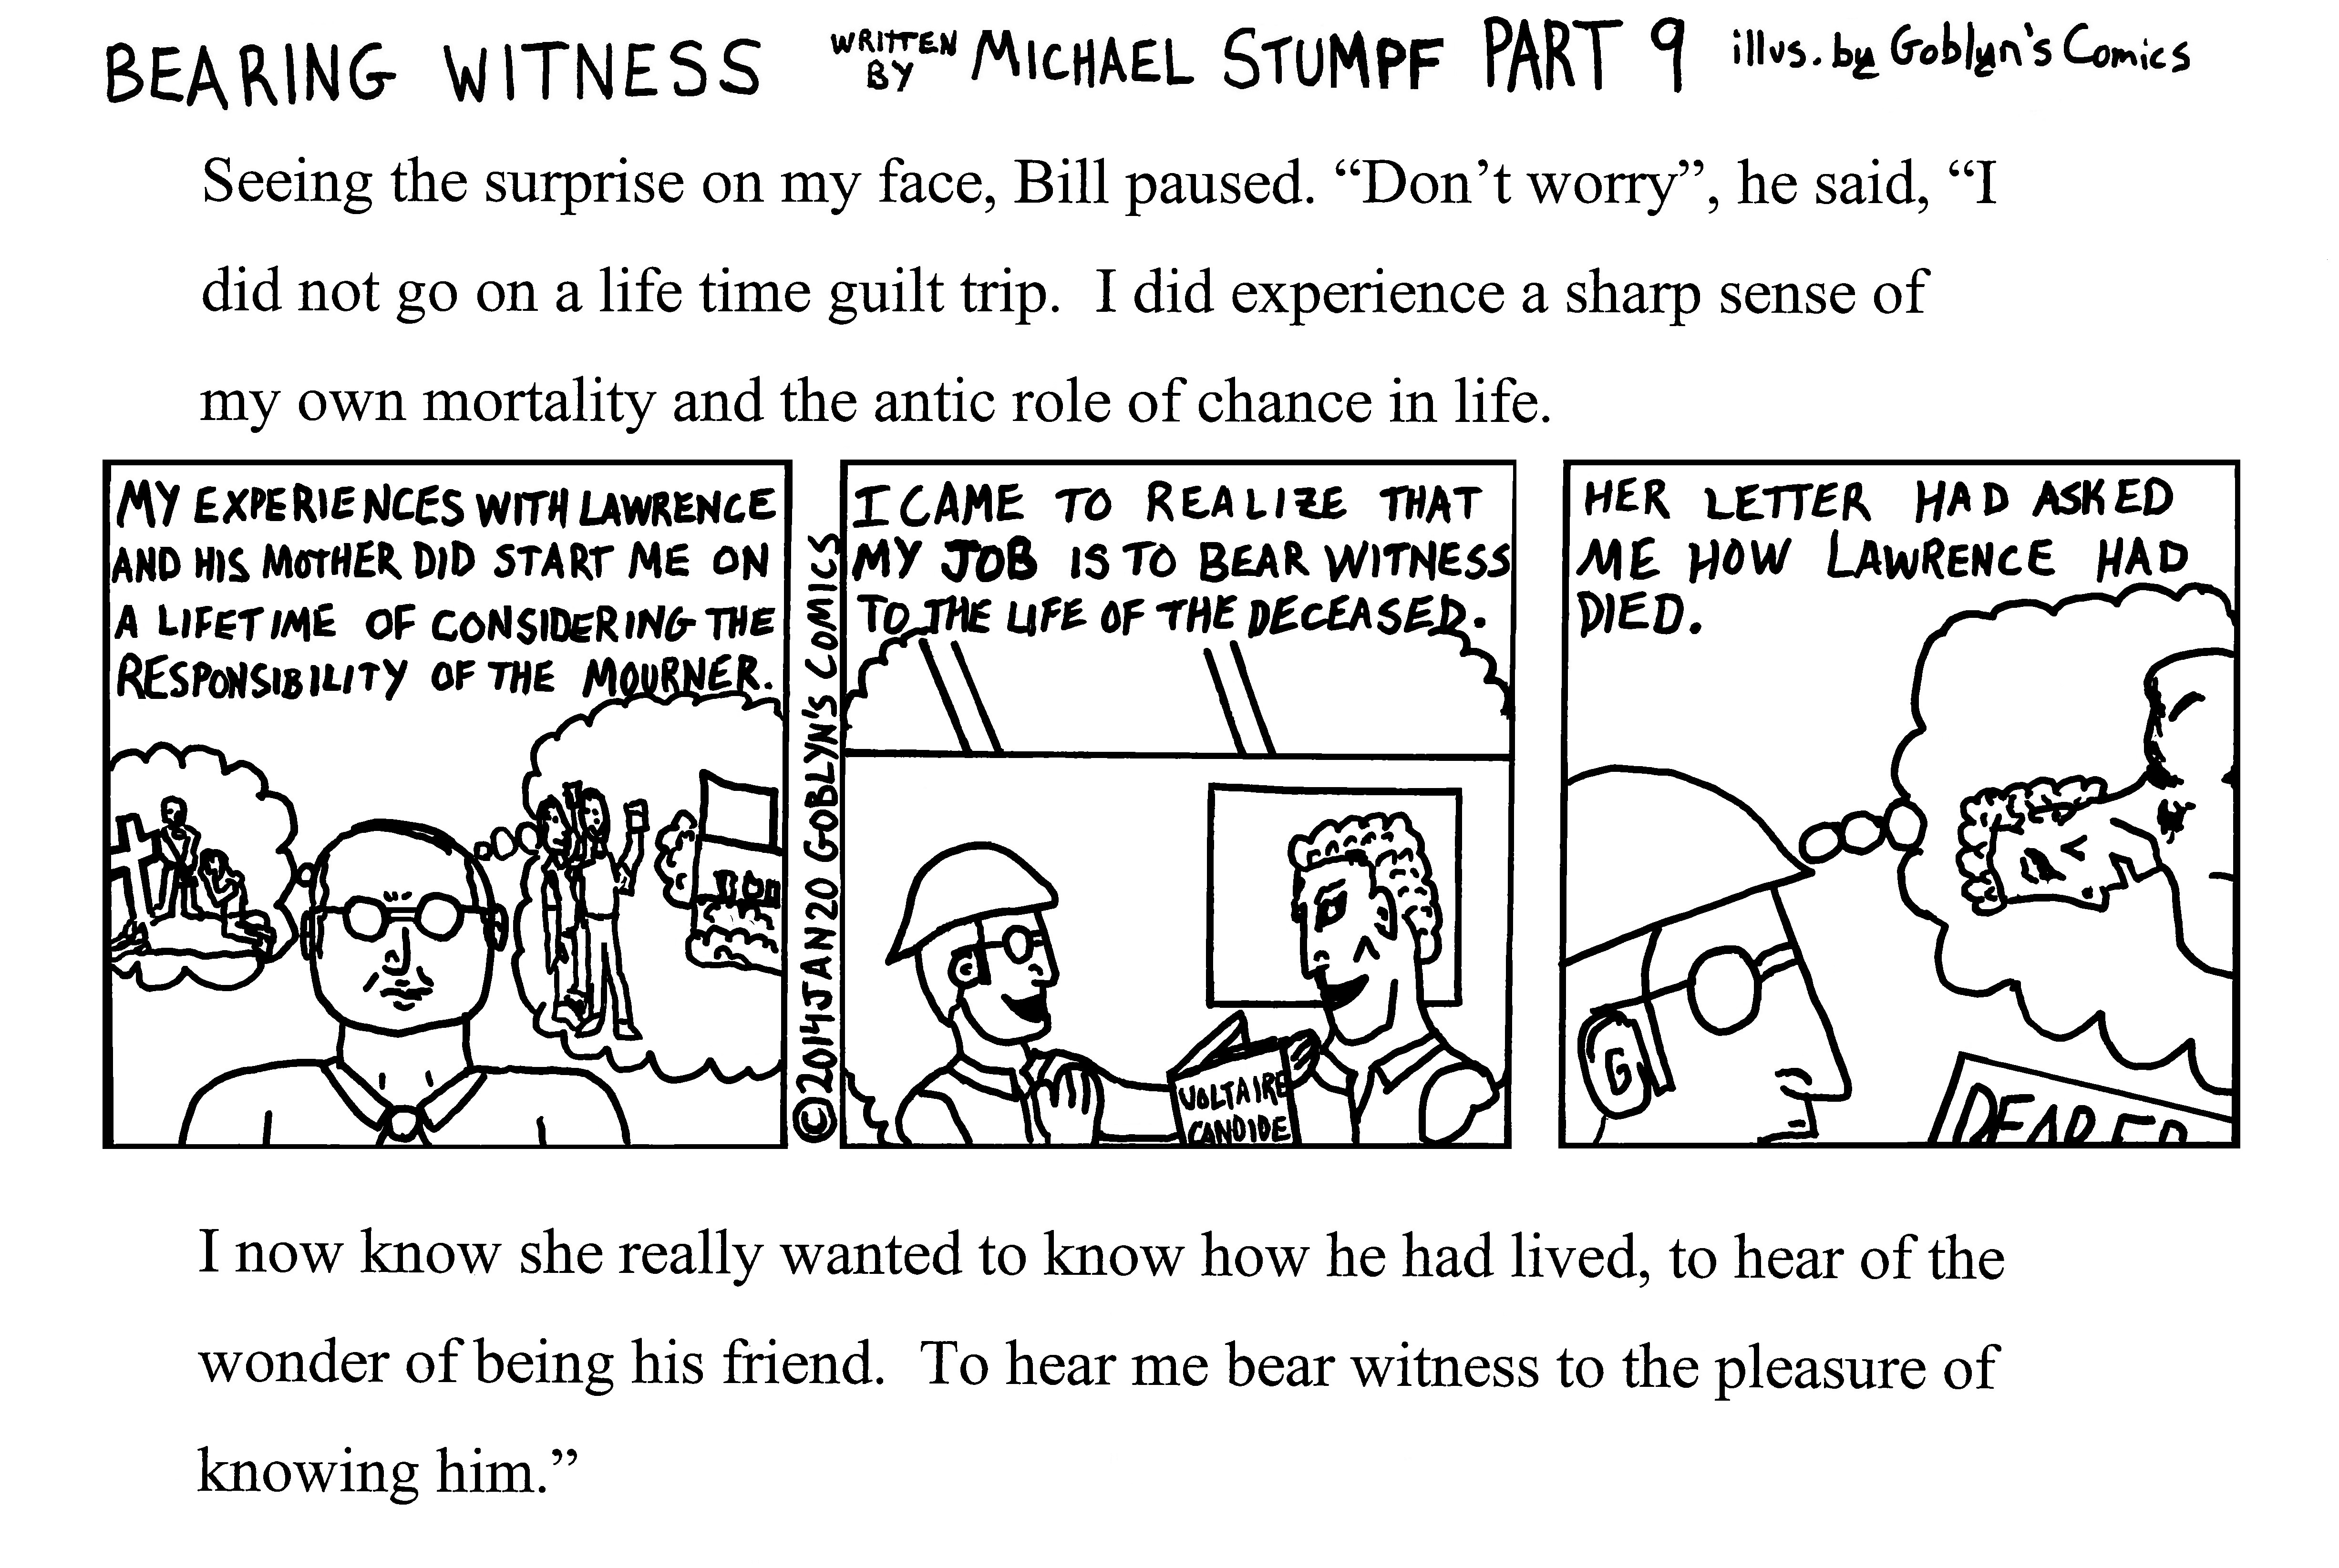 Bearing Witness Part 9 Written by Michael Stumpf, Illustrated by Goblyn's Comics